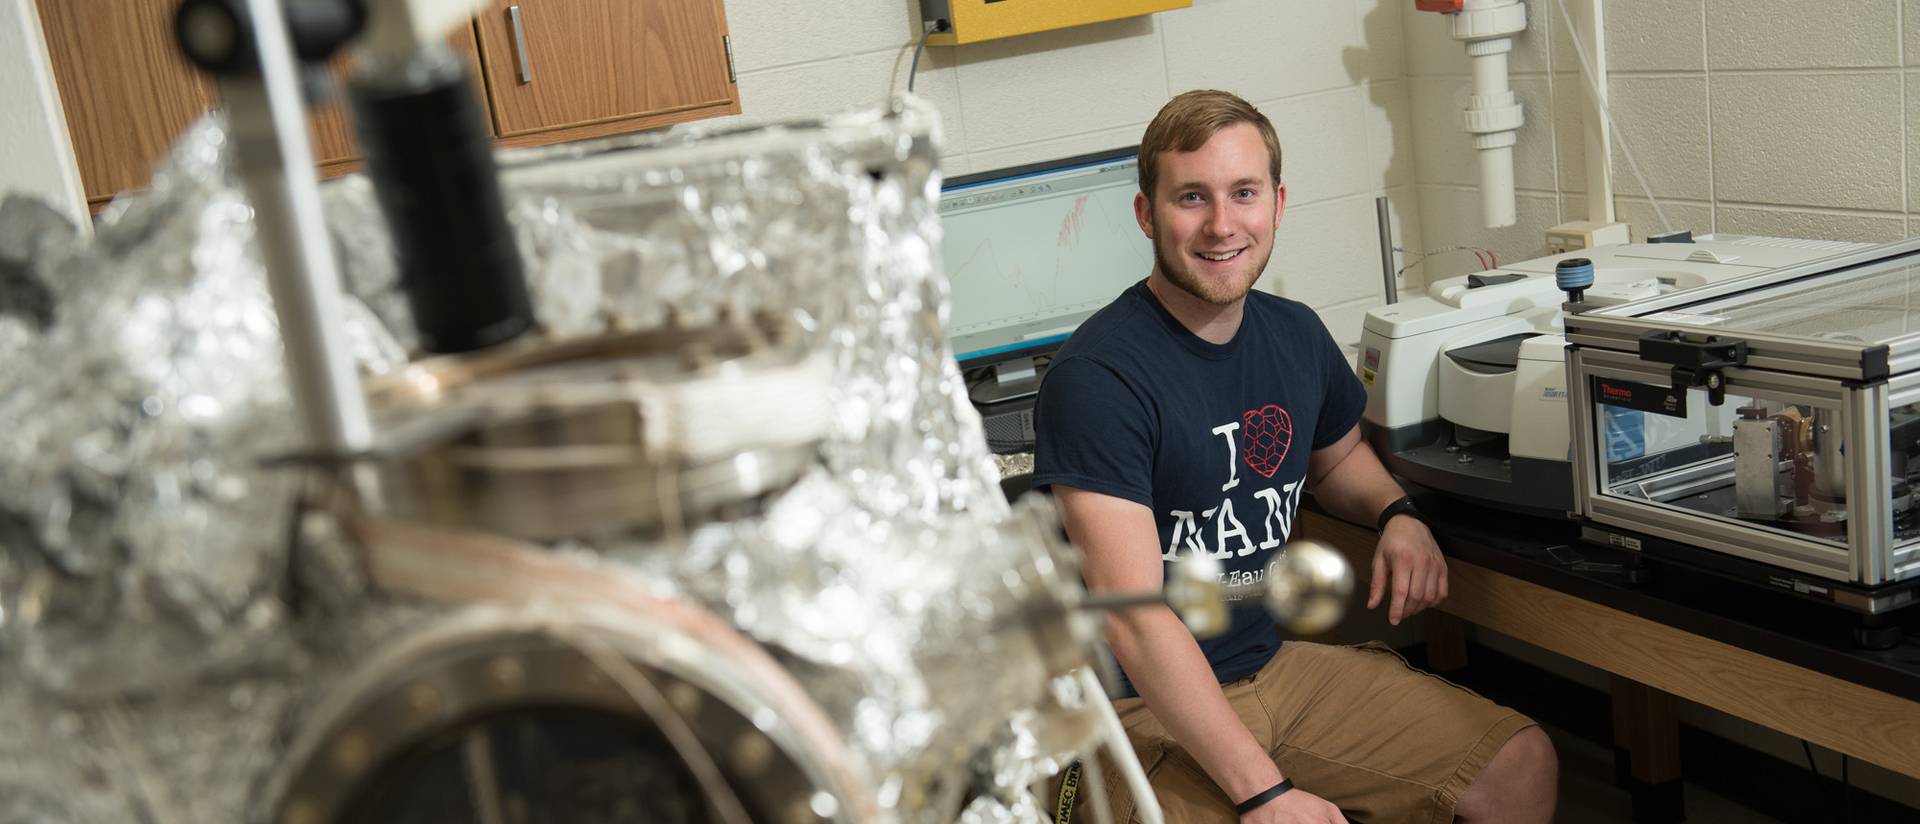 Kyle Lobermeier sits in a materials science lab and smiles.